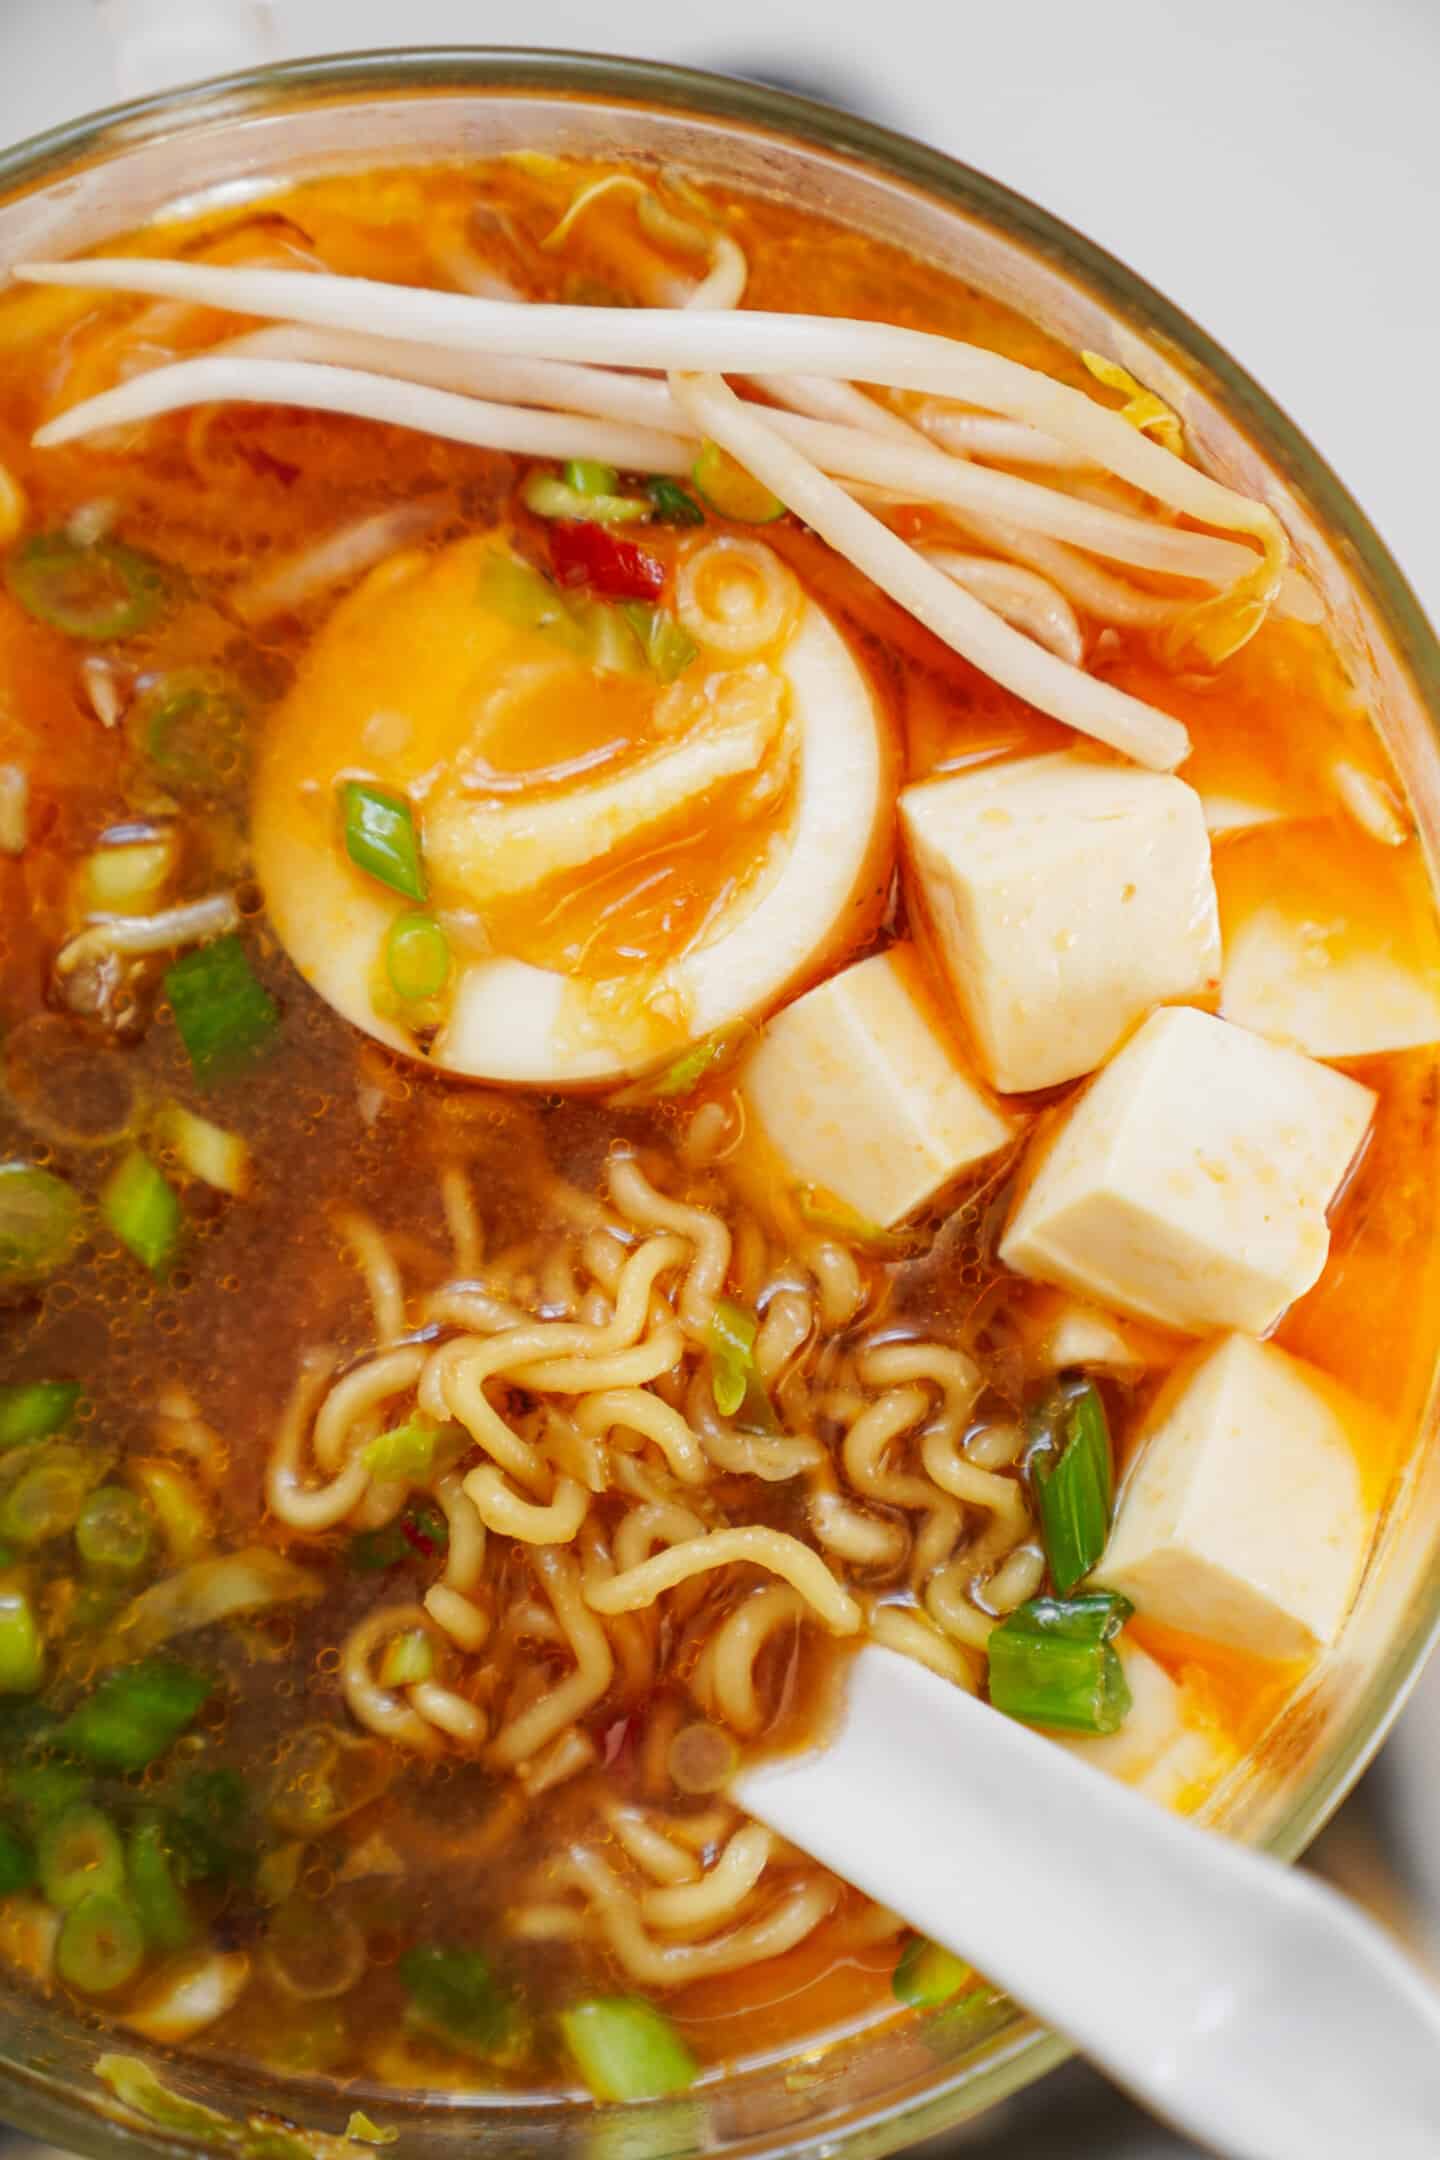 Big bowl of ramen - one of those easy ramen recipes you can't get enough of